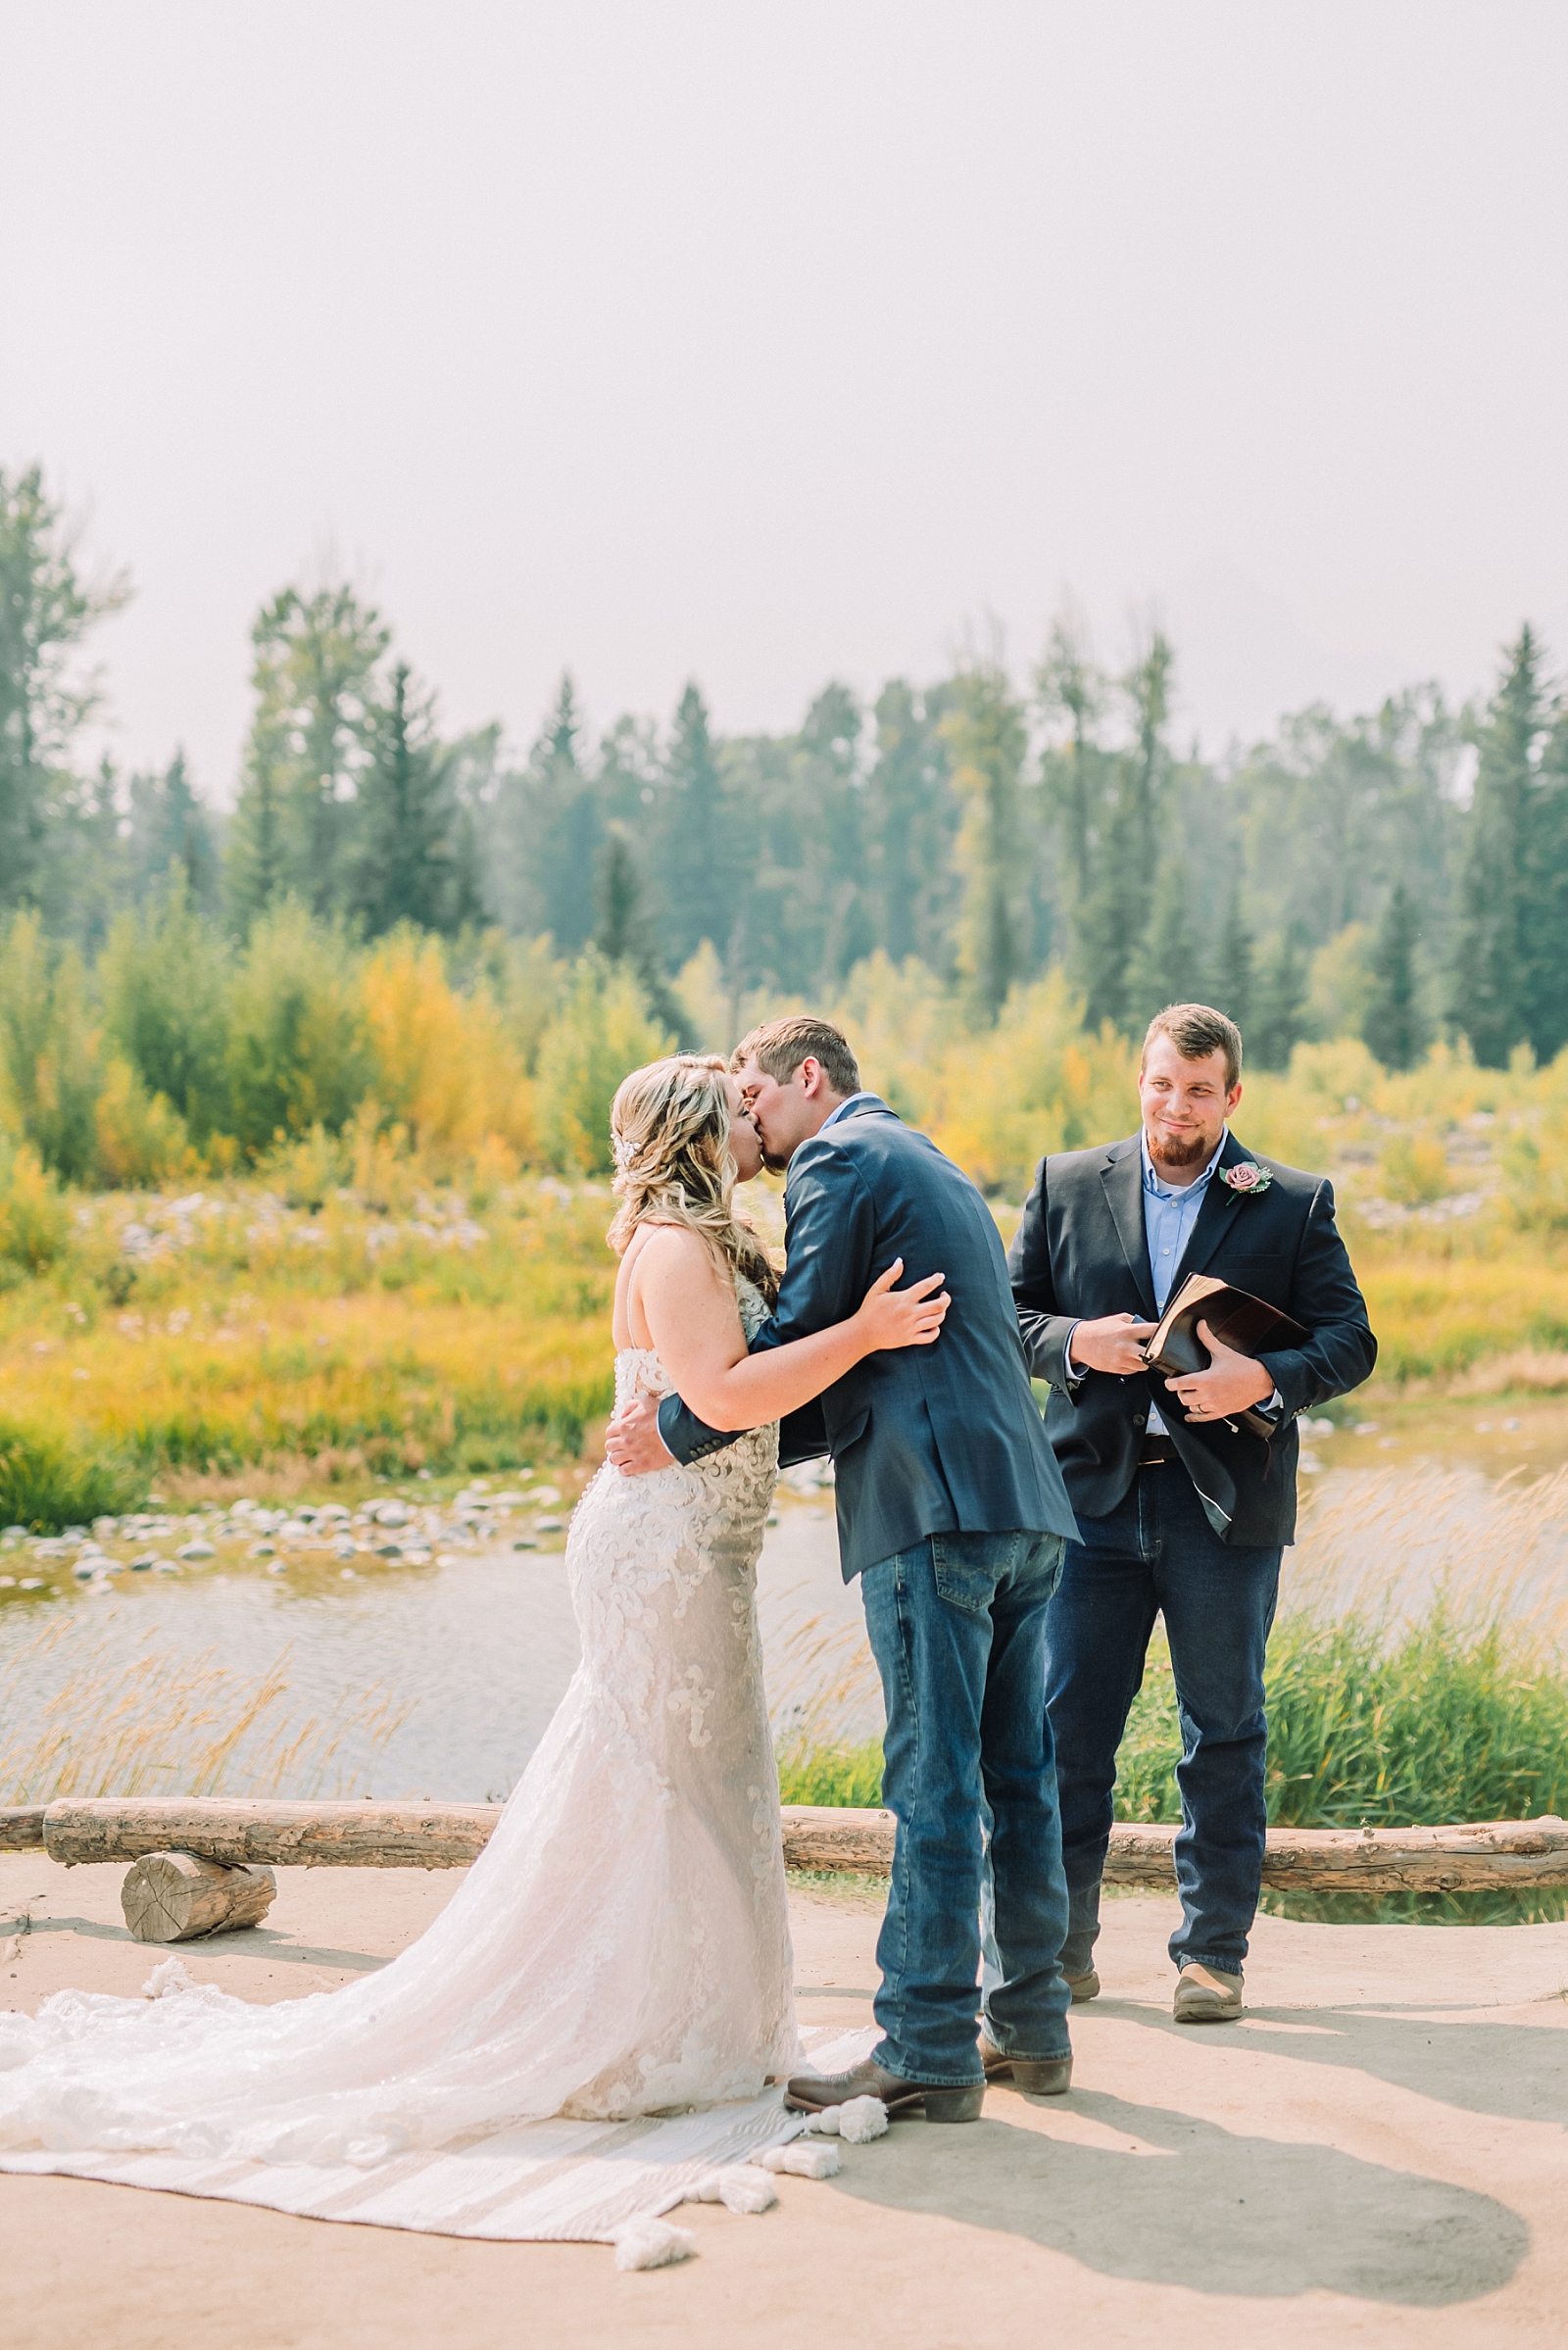 ceremony at schwabacher's landing in the tetons